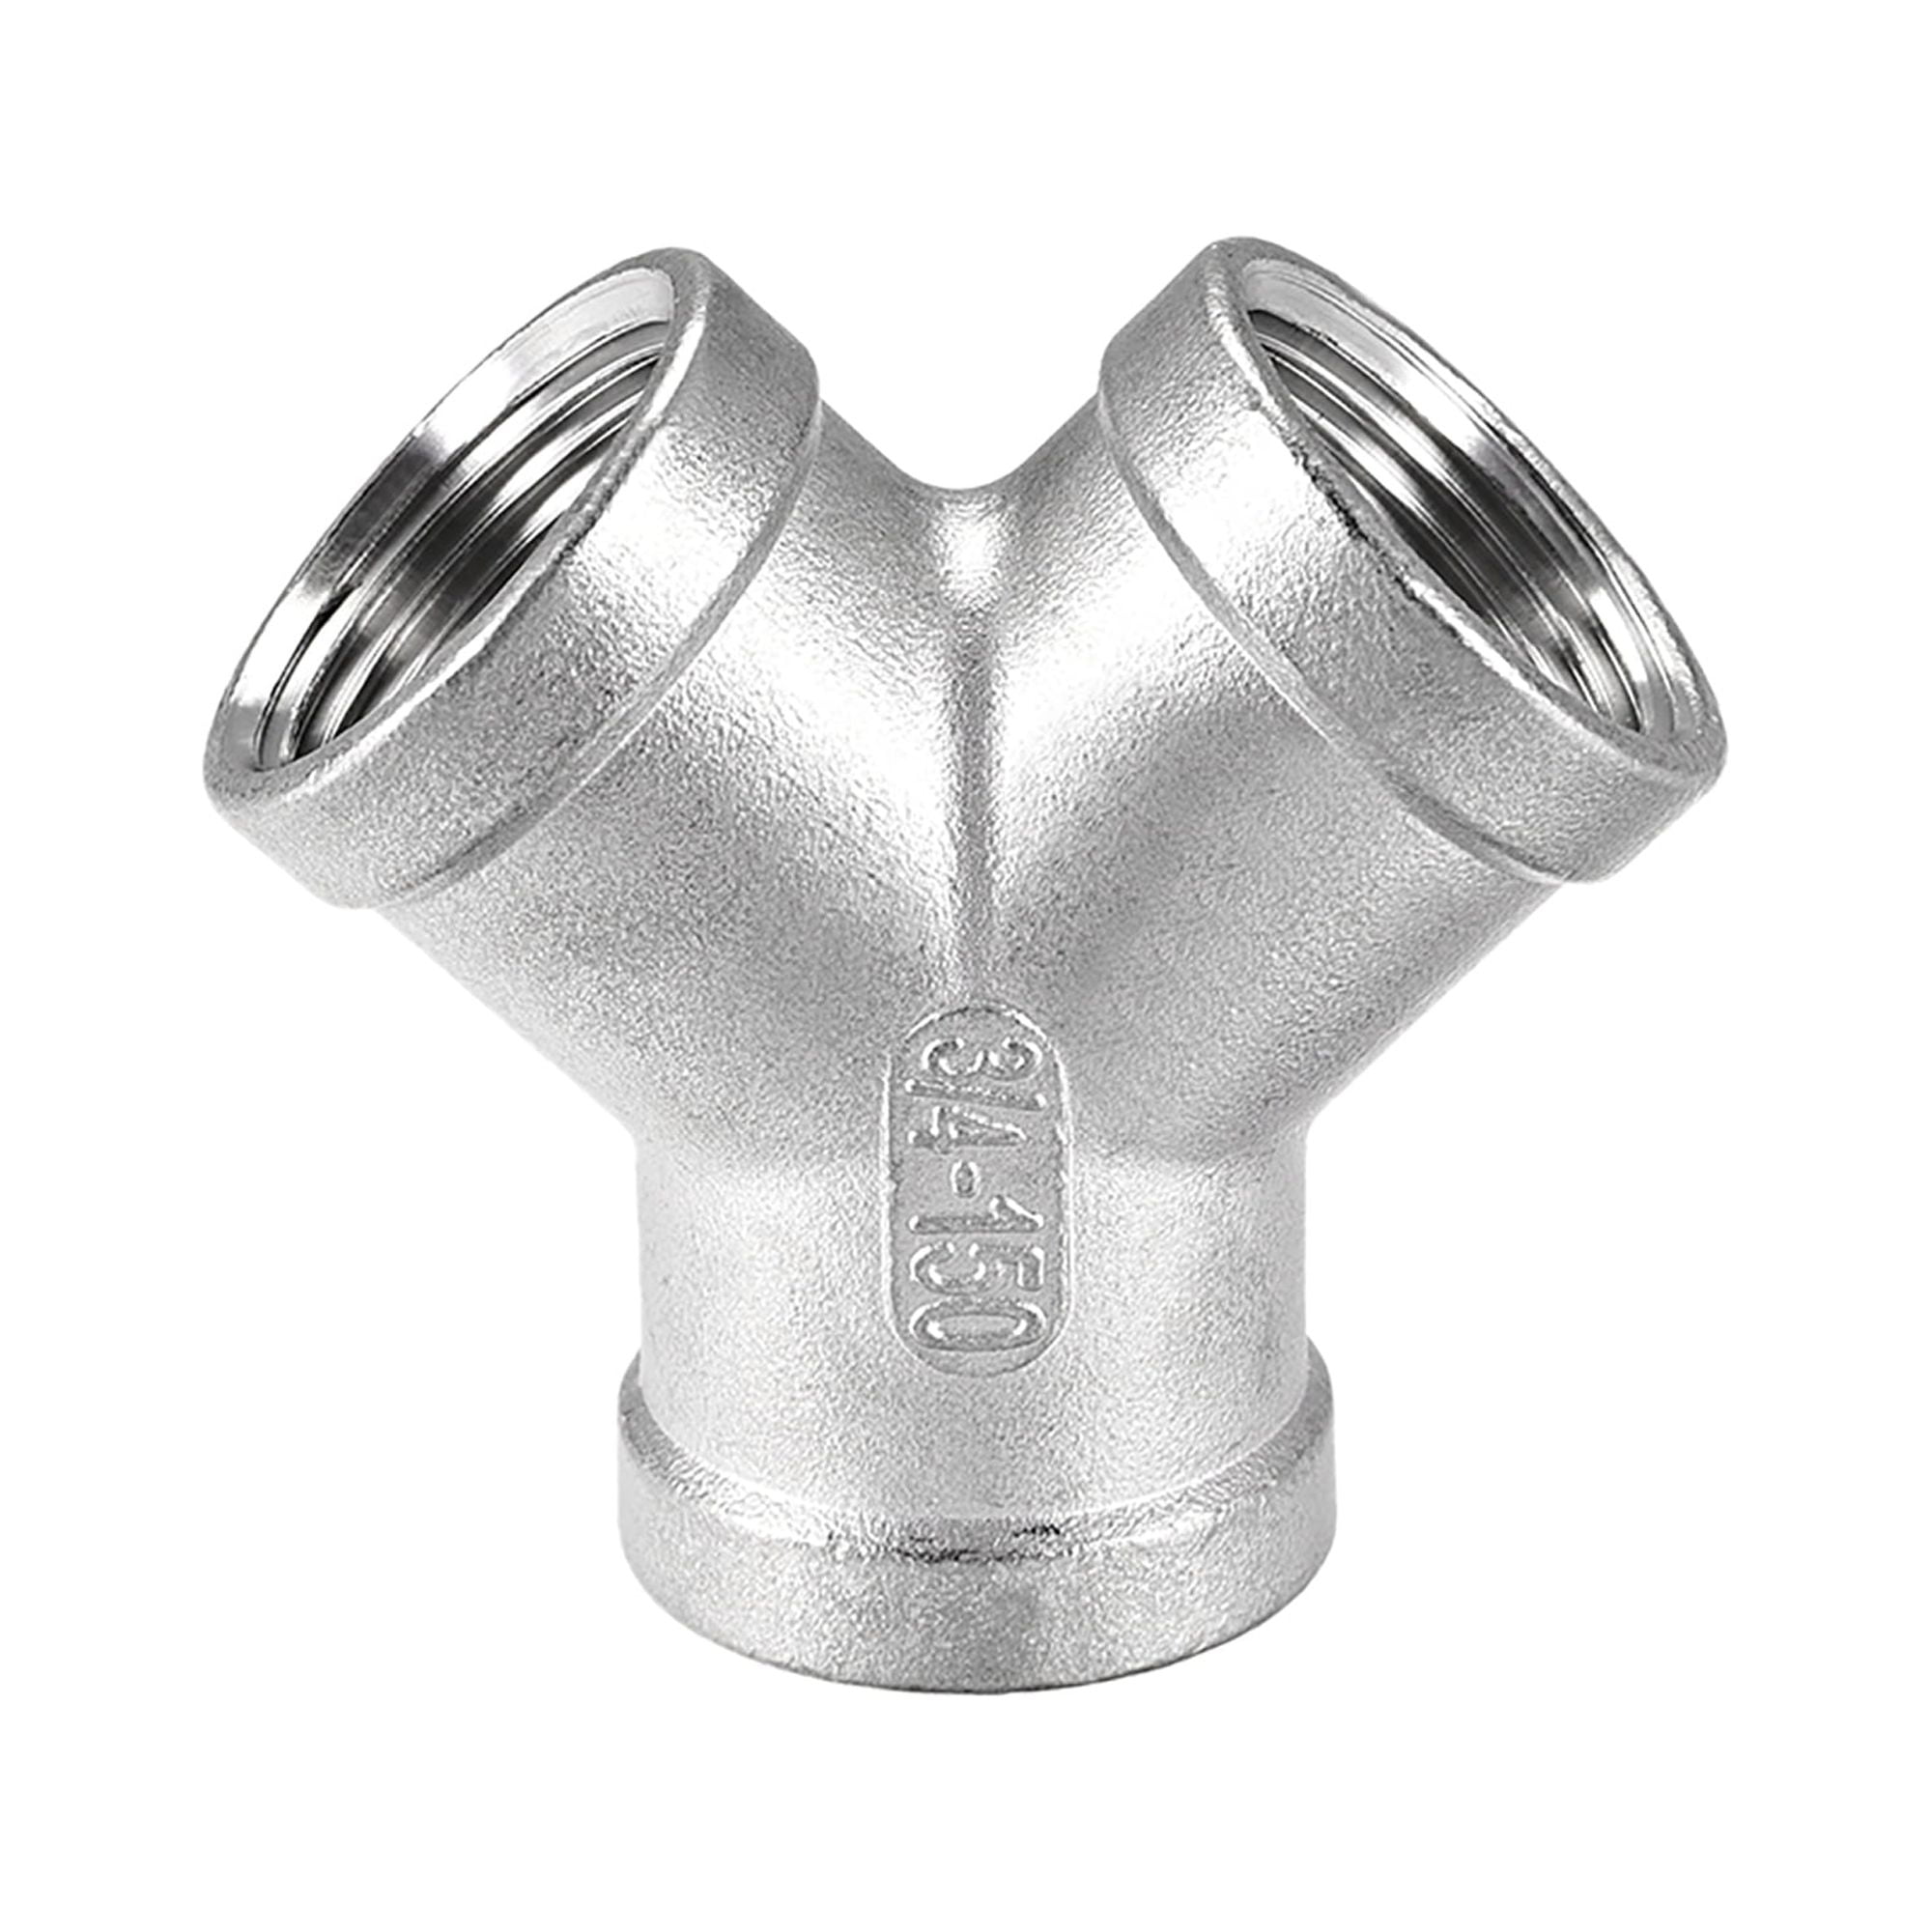 Unique Bargains Stainless Steel Tee Pipe Fitting Y Shaped 3 Way 3/4 BSPT  Female Class Connector Coupler Silver